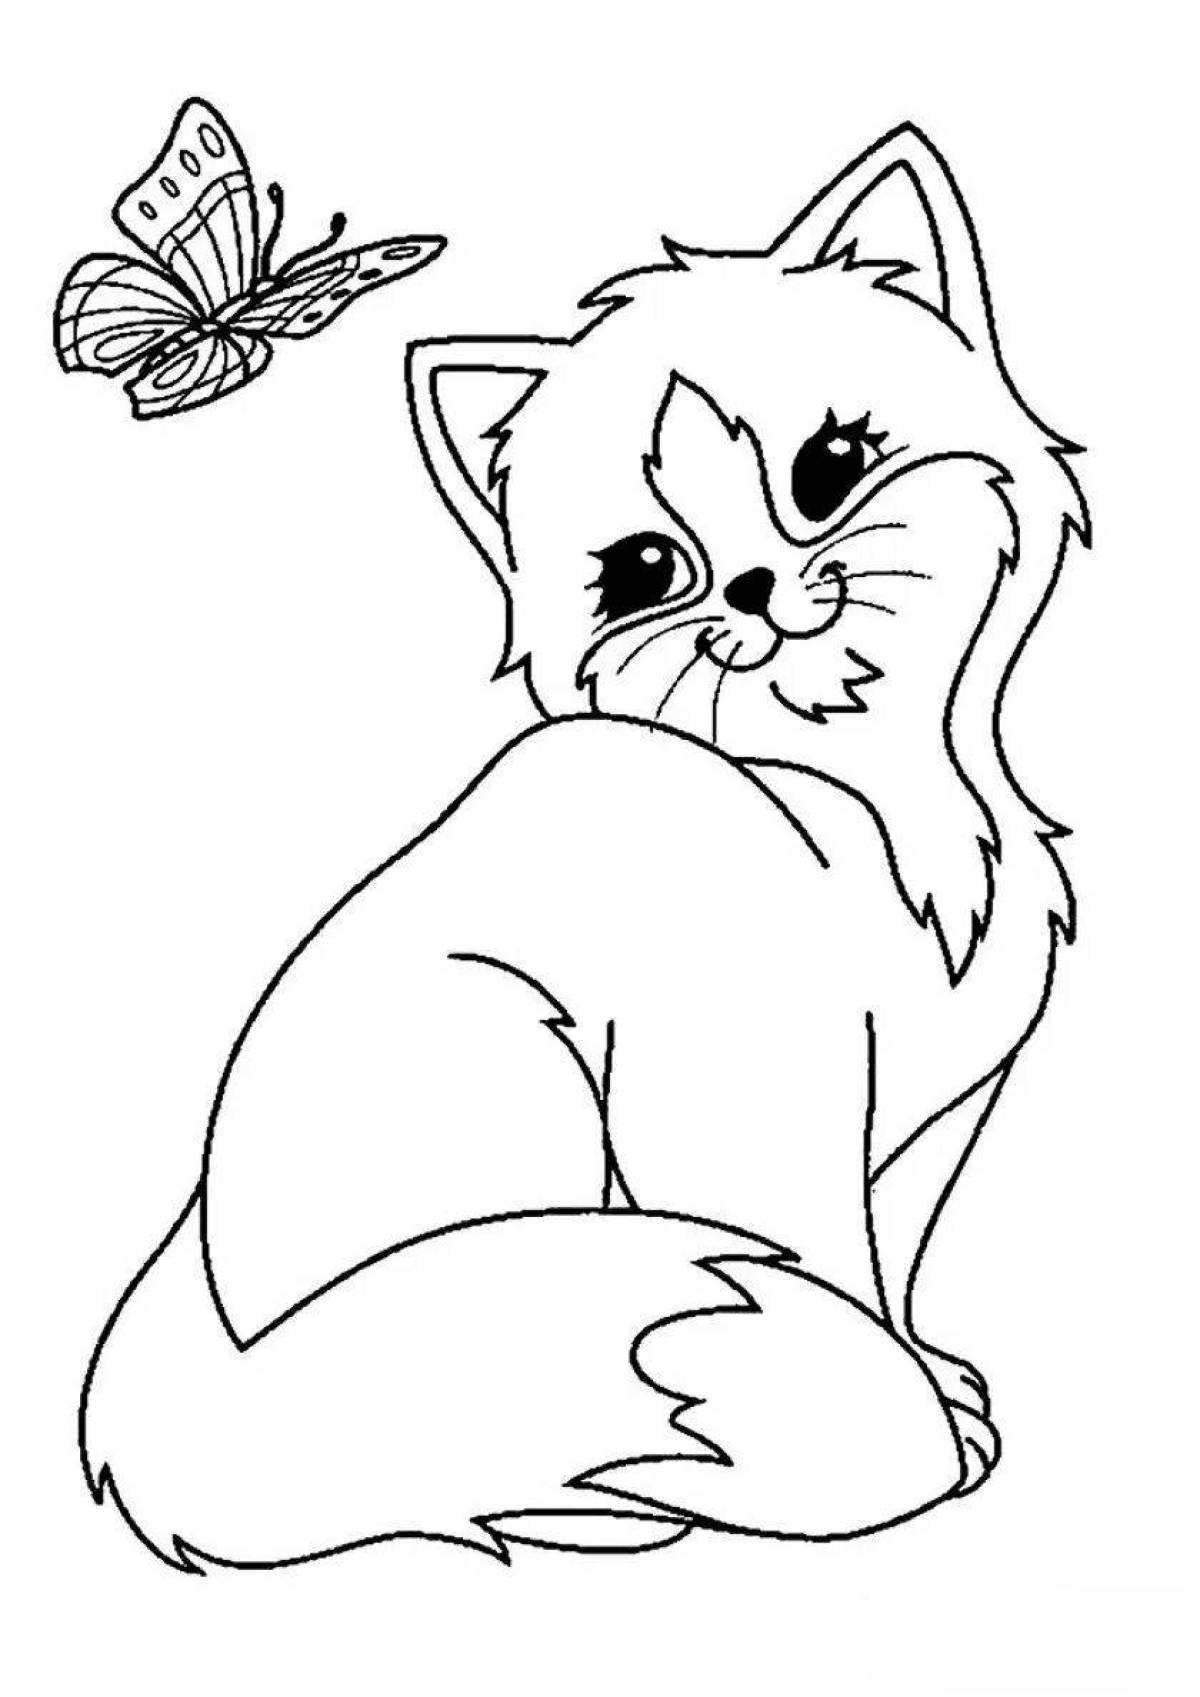 Cute cats coloring page